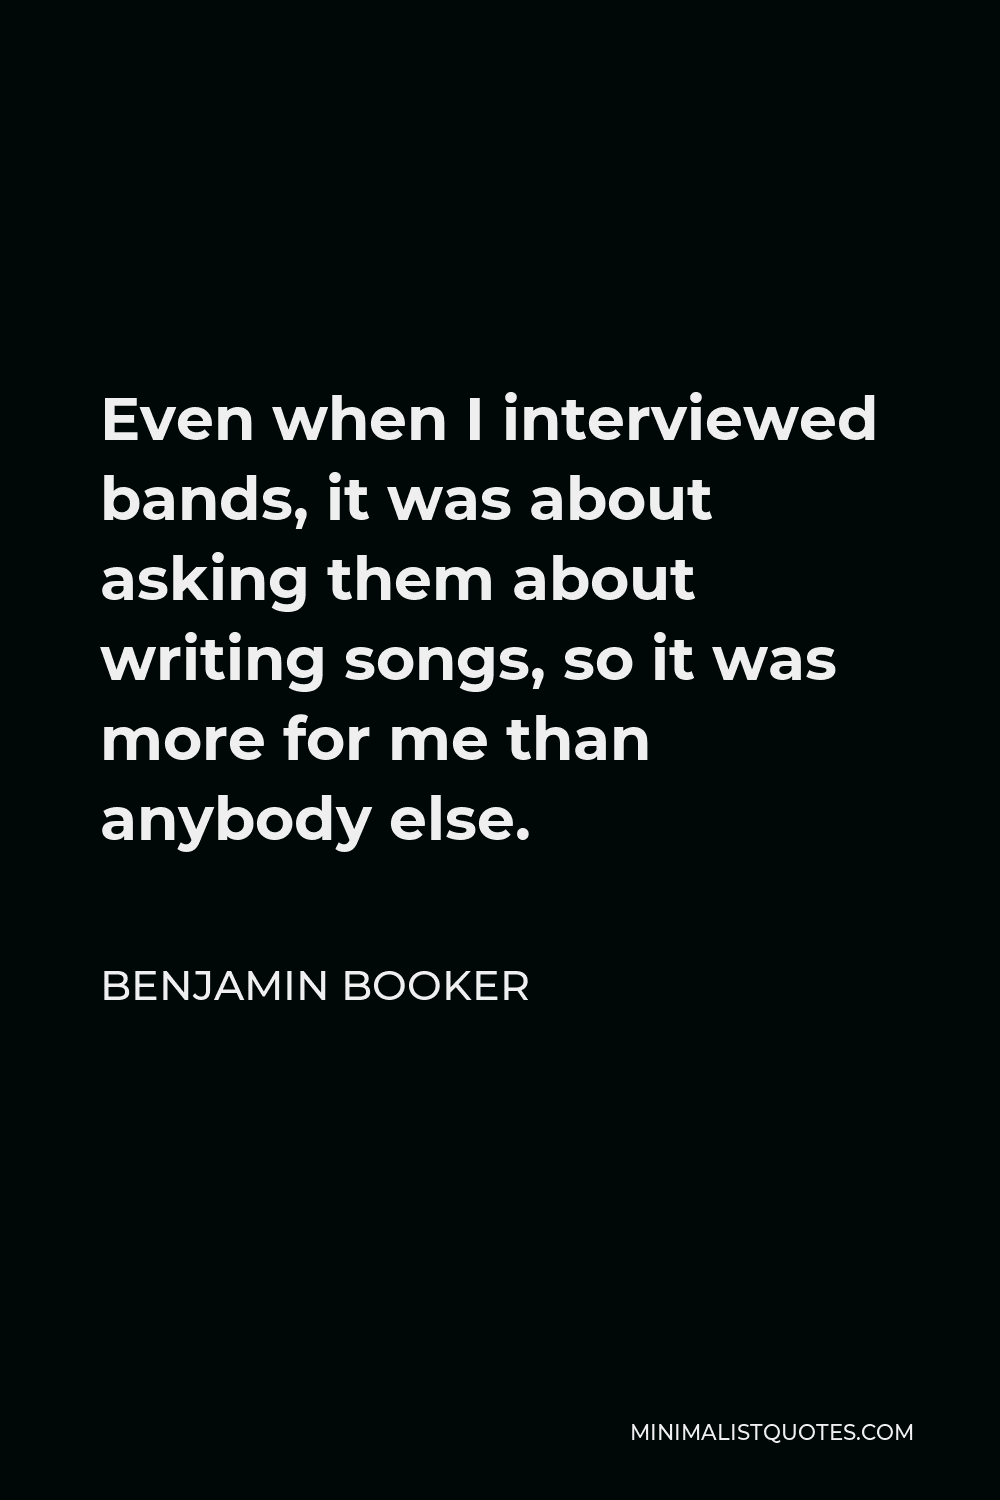 Benjamin Booker Quote - Even when I interviewed bands, it was about asking them about writing songs, so it was more for me than anybody else.